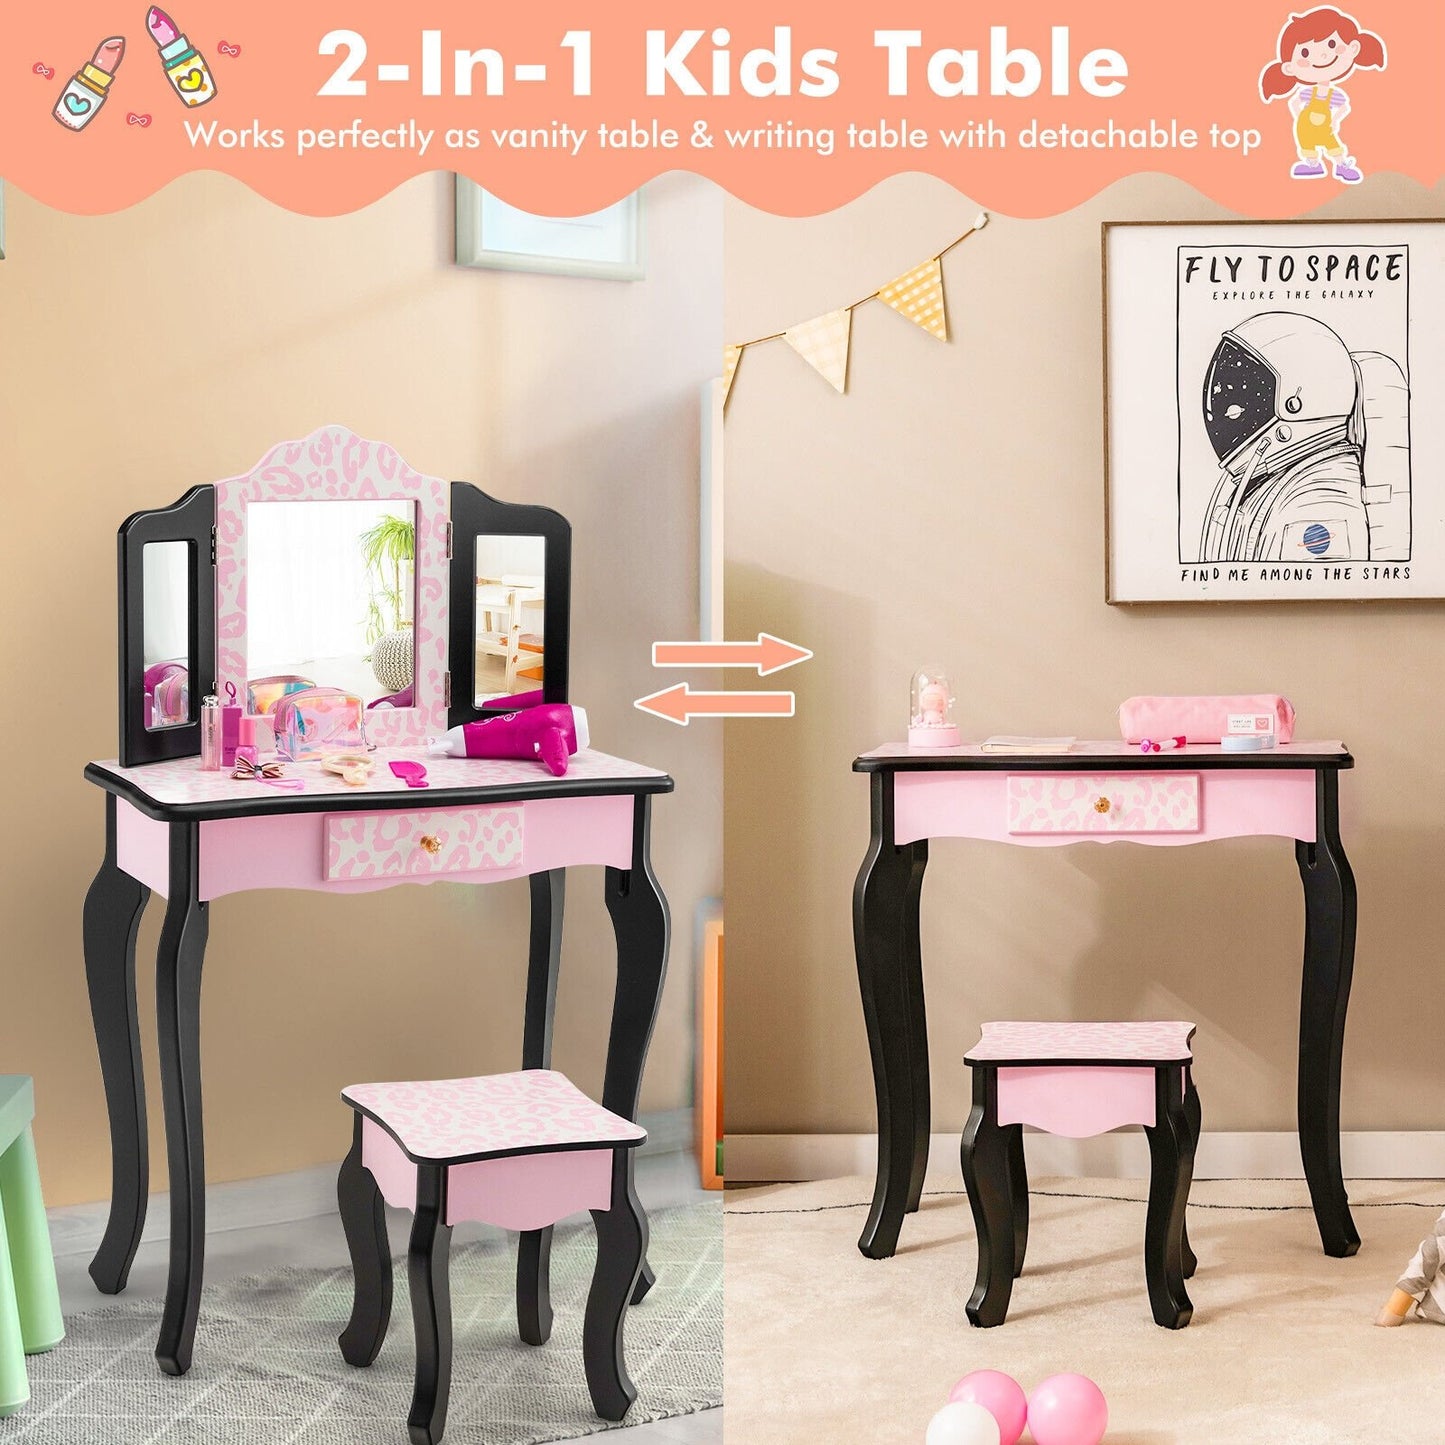 Kid Vanity Set with Tri-Folding Mirror and Leopard Print, Pink